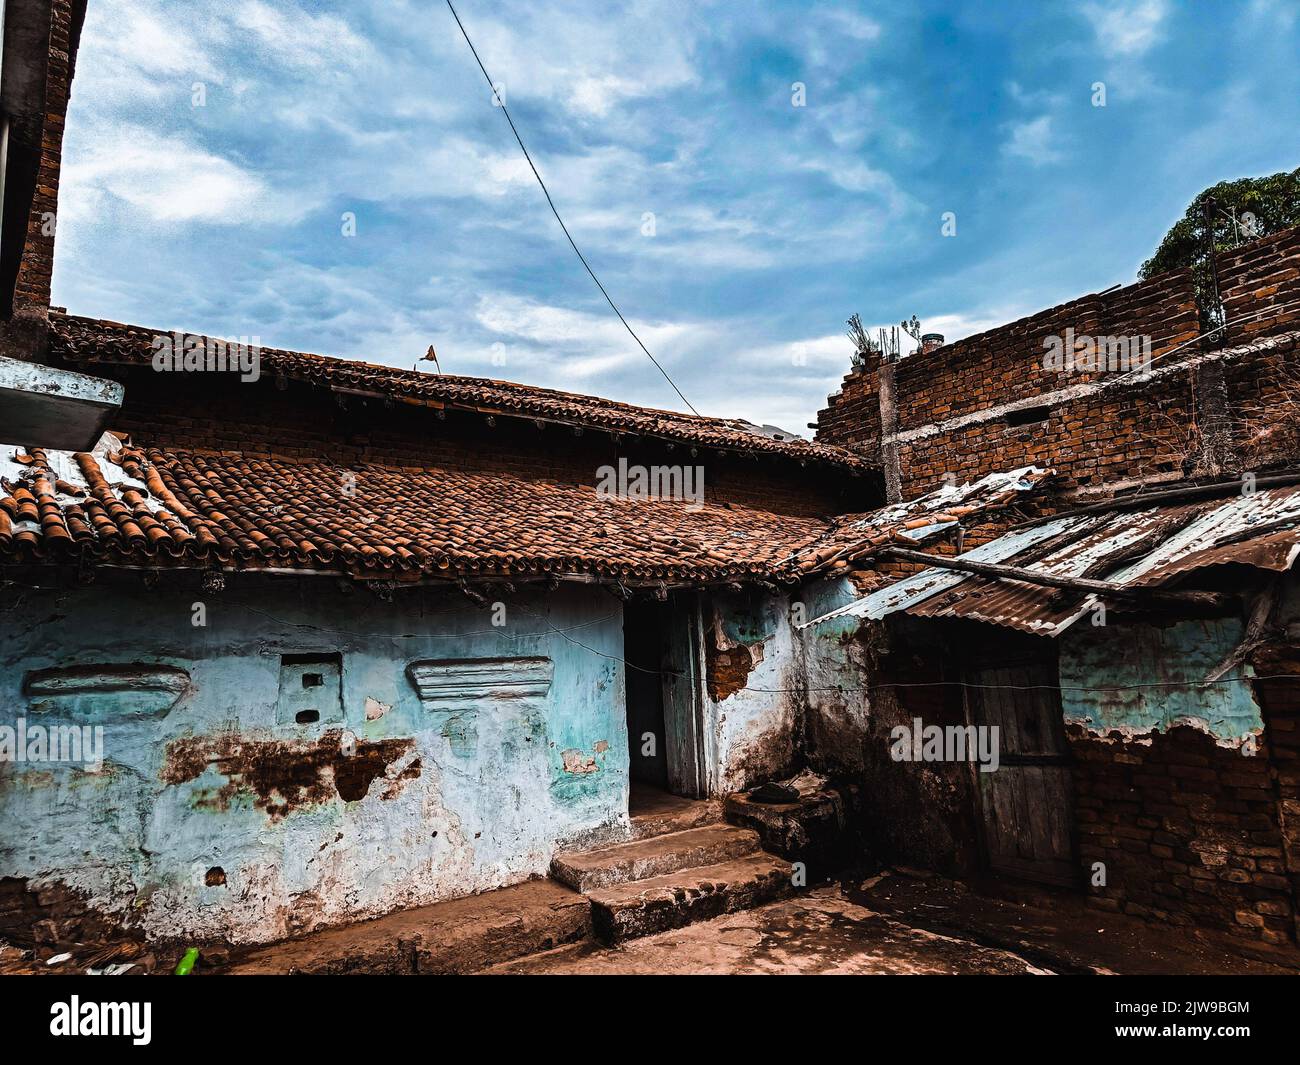 An old rural house in Hazaribagh, India Stock Photo